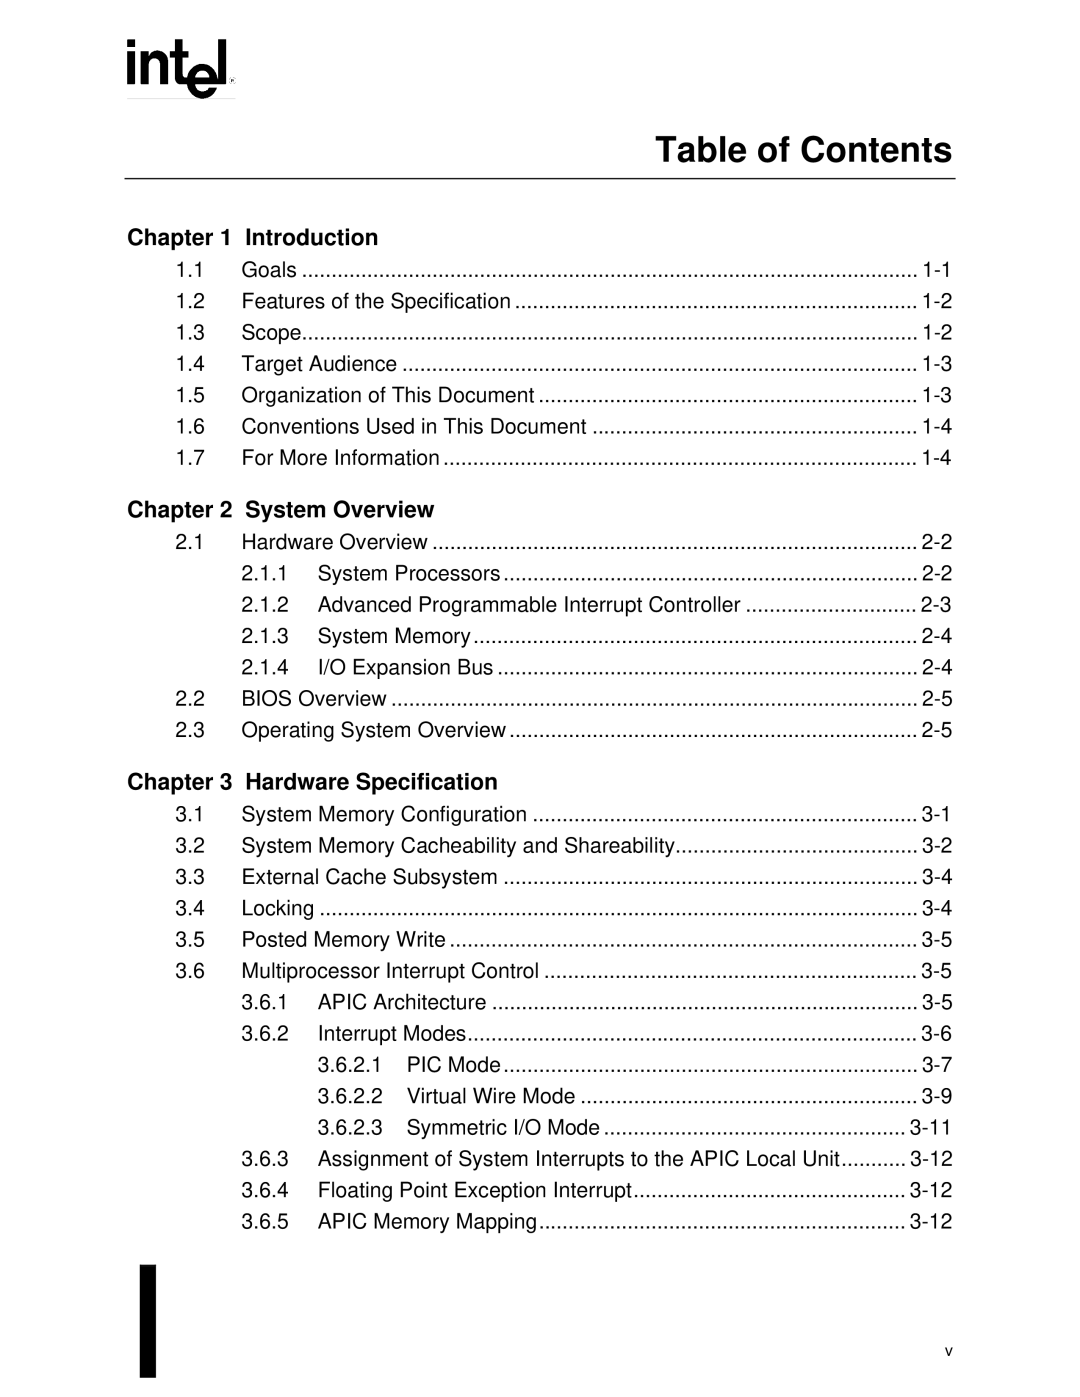 Intel MultiProcessor manual Table of Contents, Introduction, System Overview, Hardware Specification 